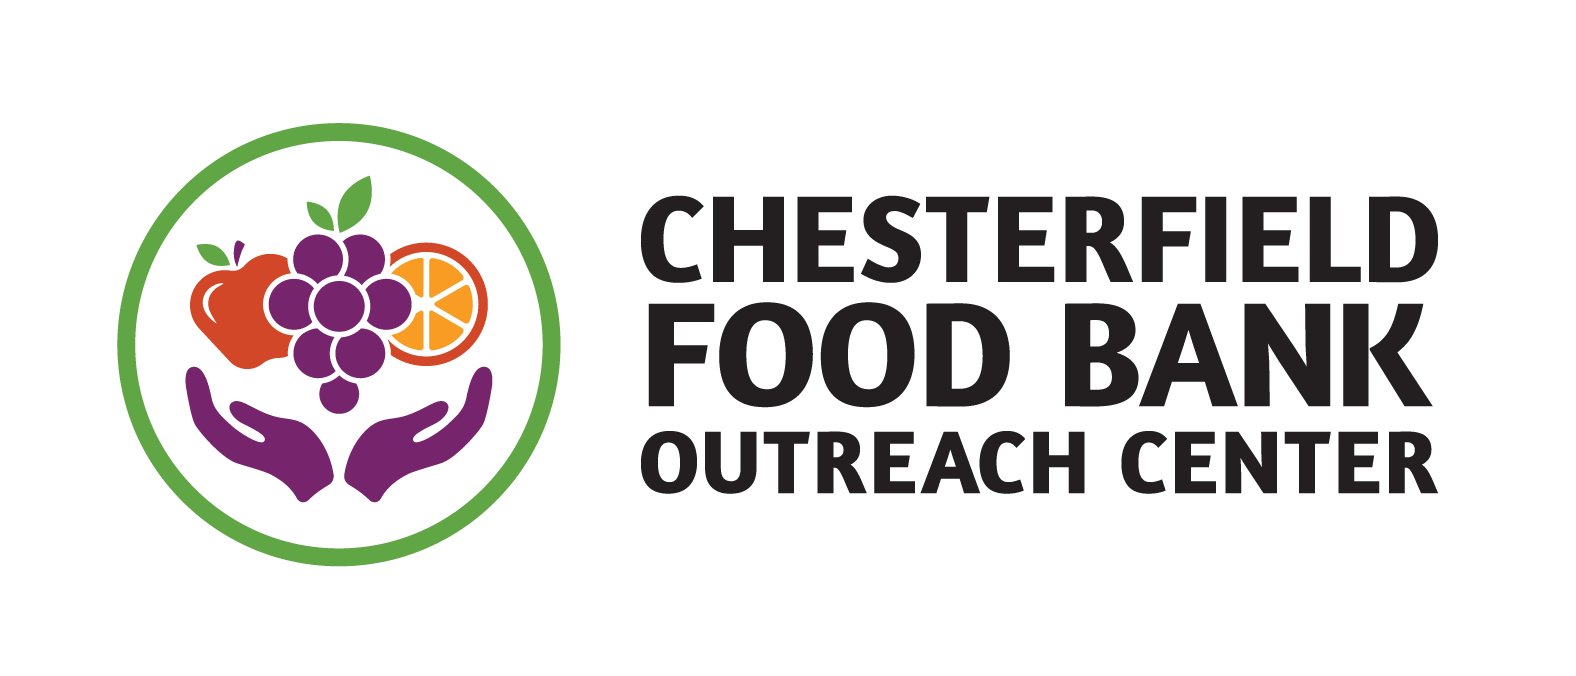 Chesterfield Food Bank logo